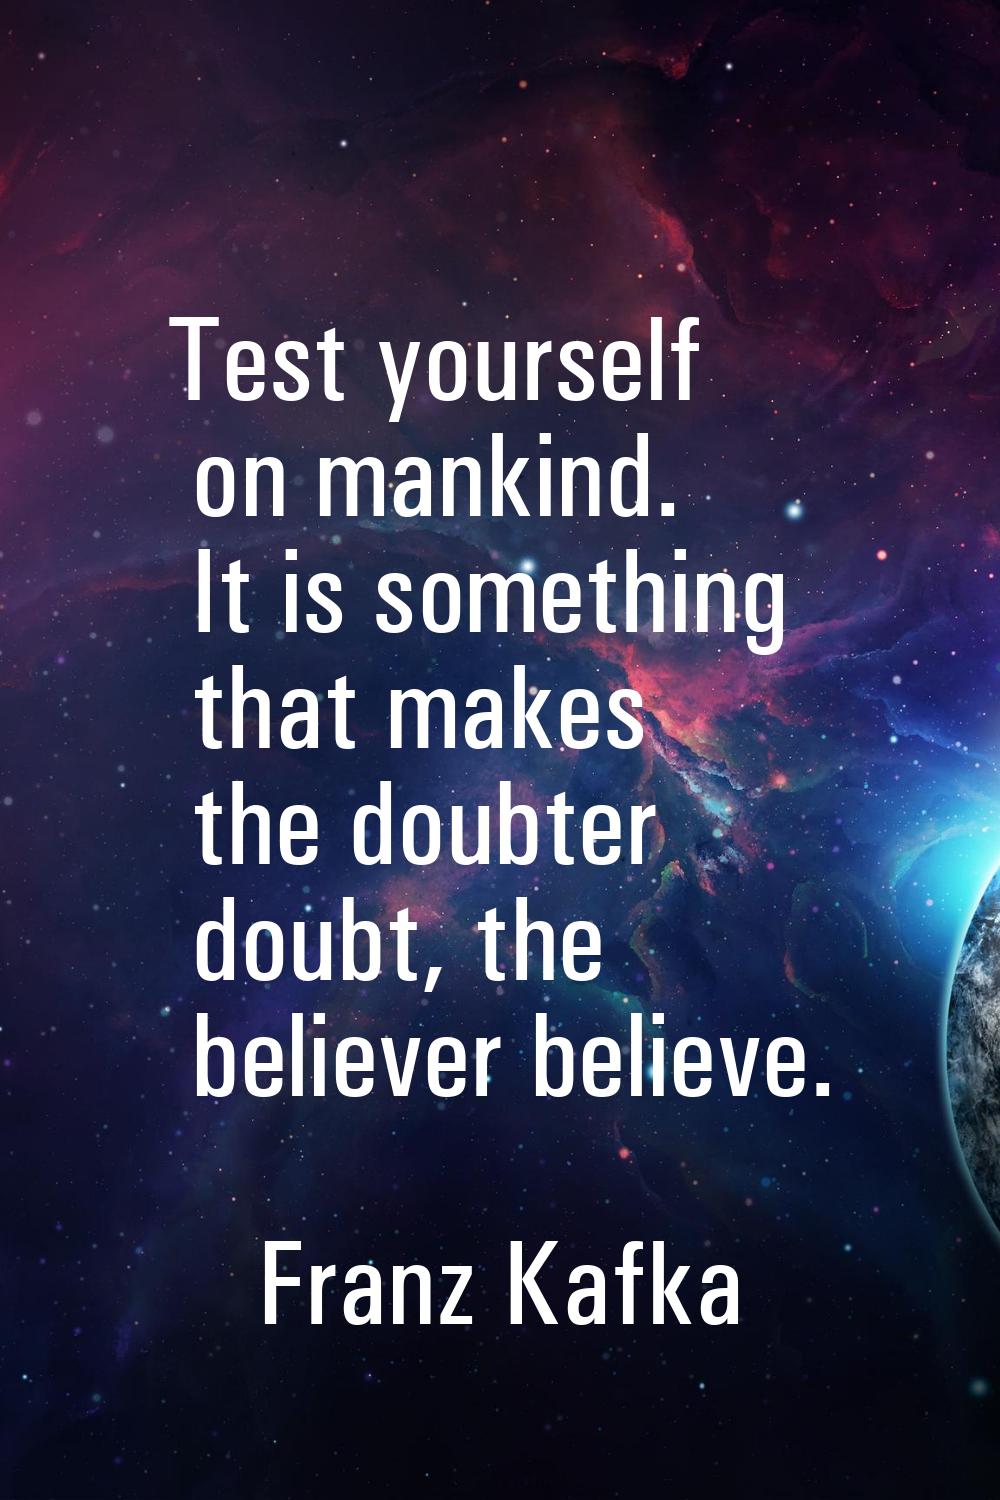 Test yourself on mankind. It is something that makes the doubter doubt, the believer believe.